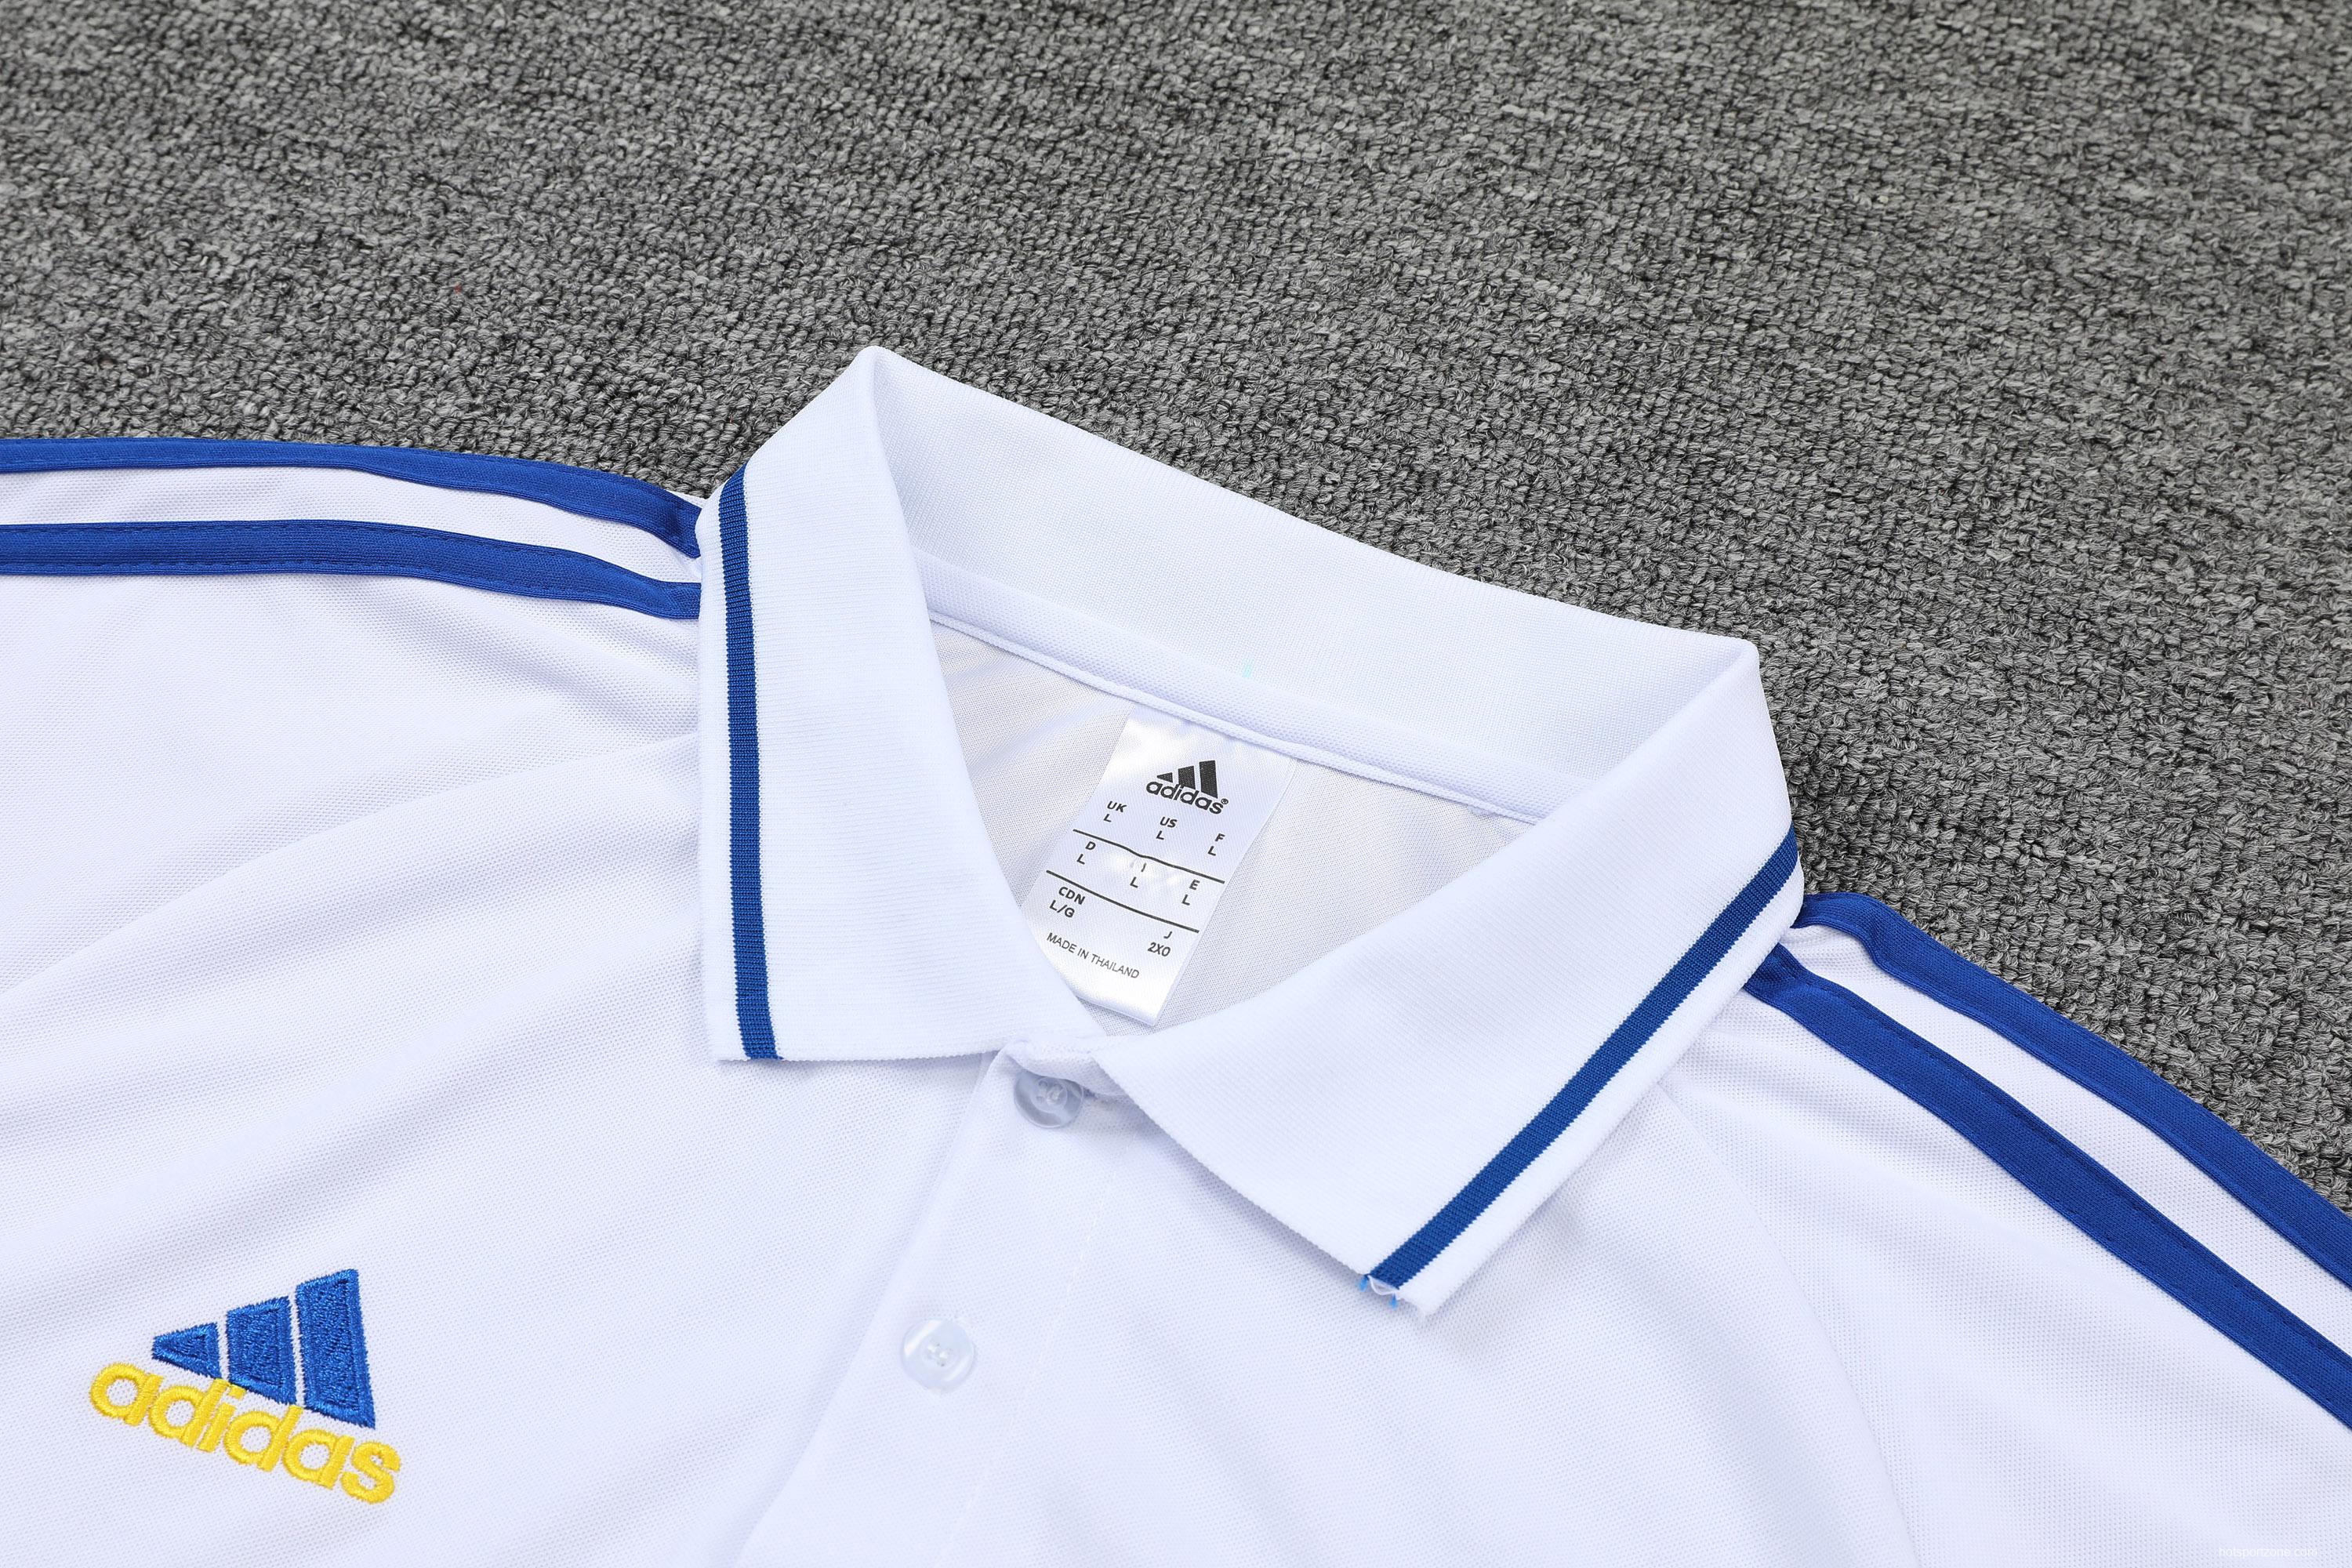 Juventus POLO kit blue and white (not sold separately)